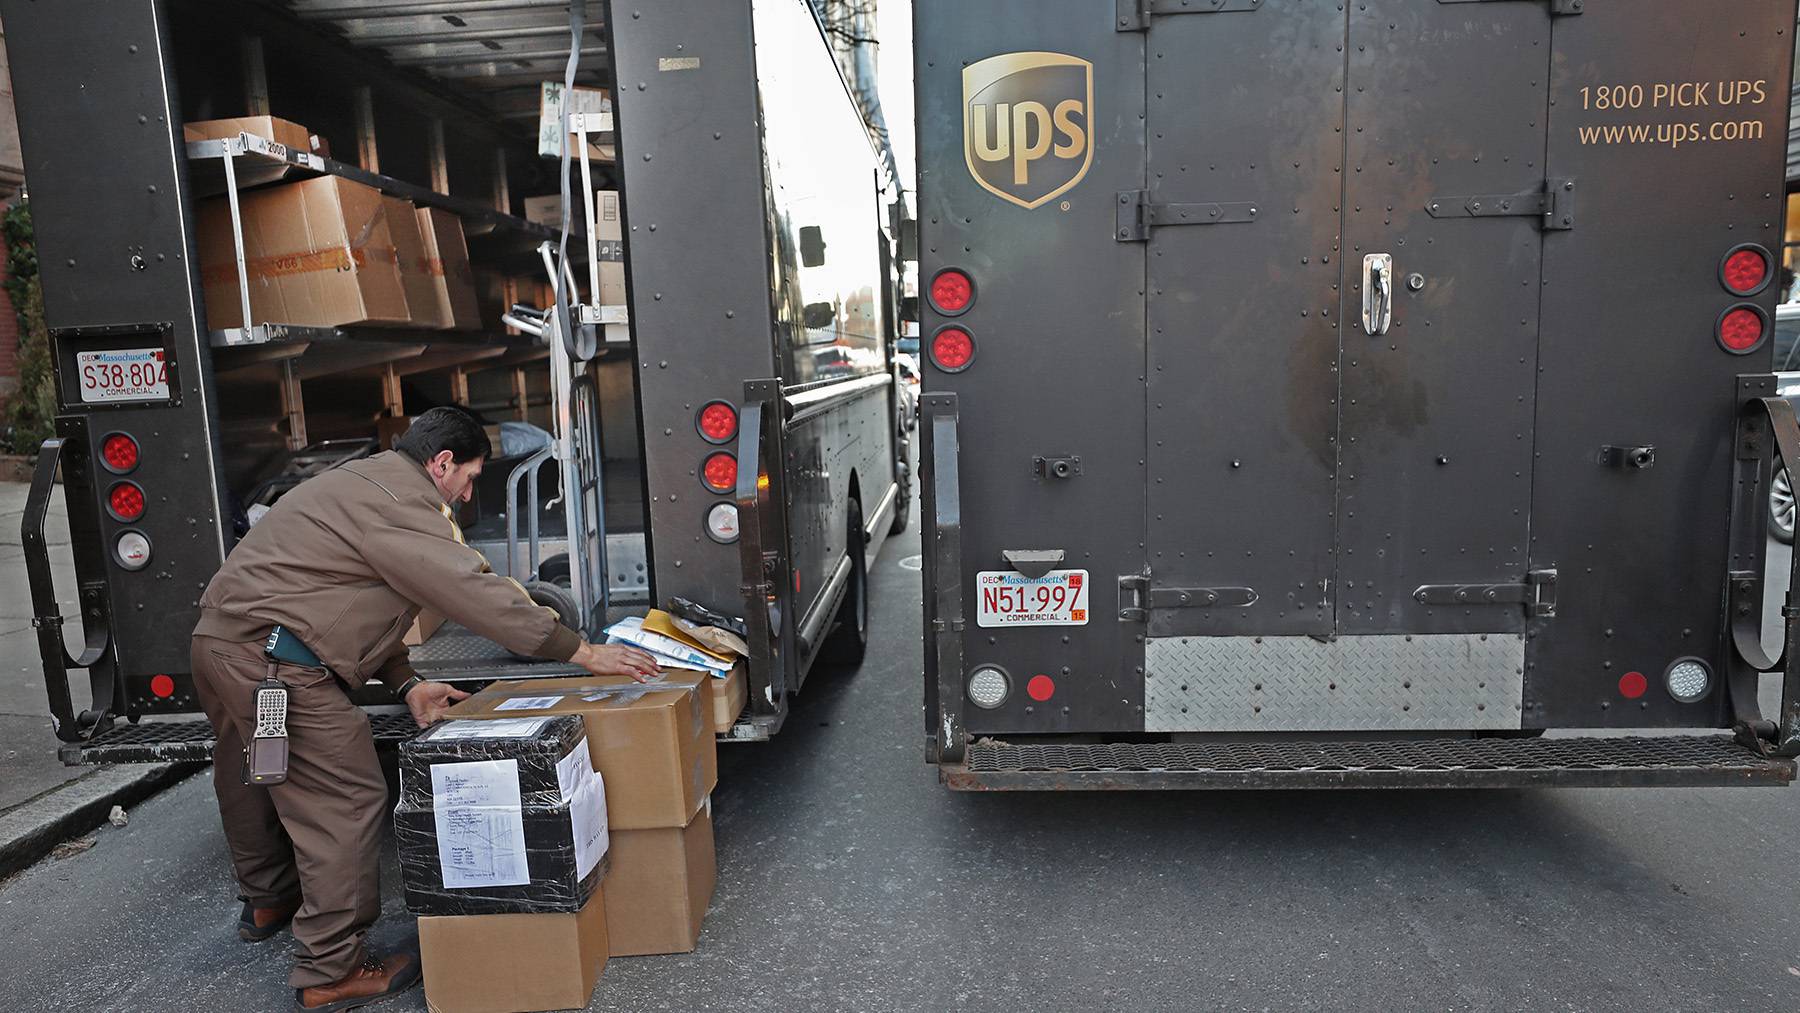 UPS driver loading packages into a truck.